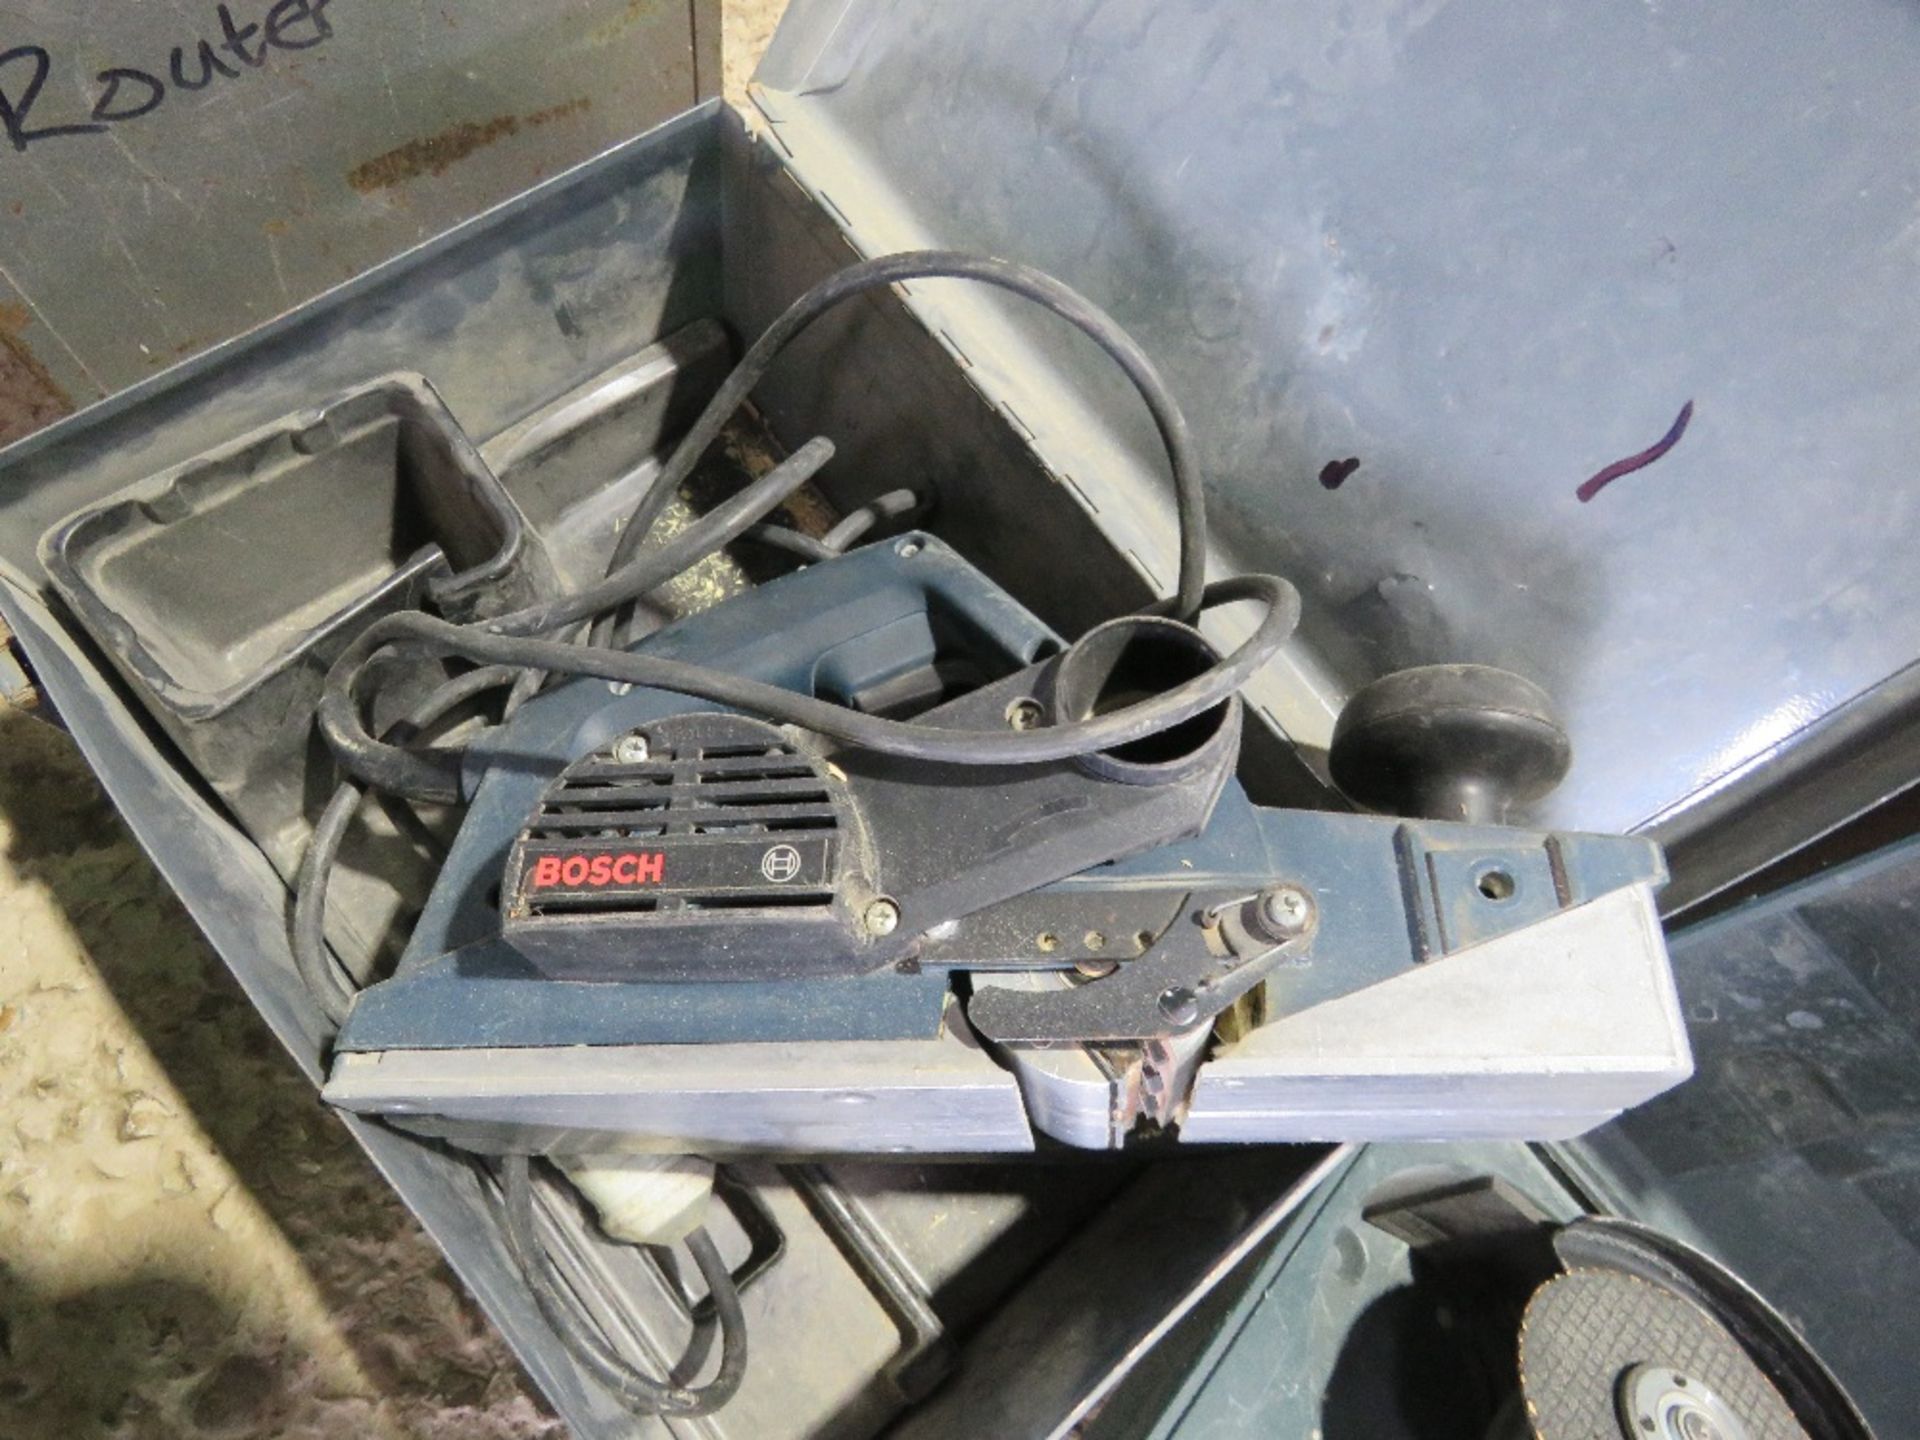 2 X POWER TOOLS: ANGLE GRINDER AND PLANER, 110VOLT POWERED. - Image 5 of 5